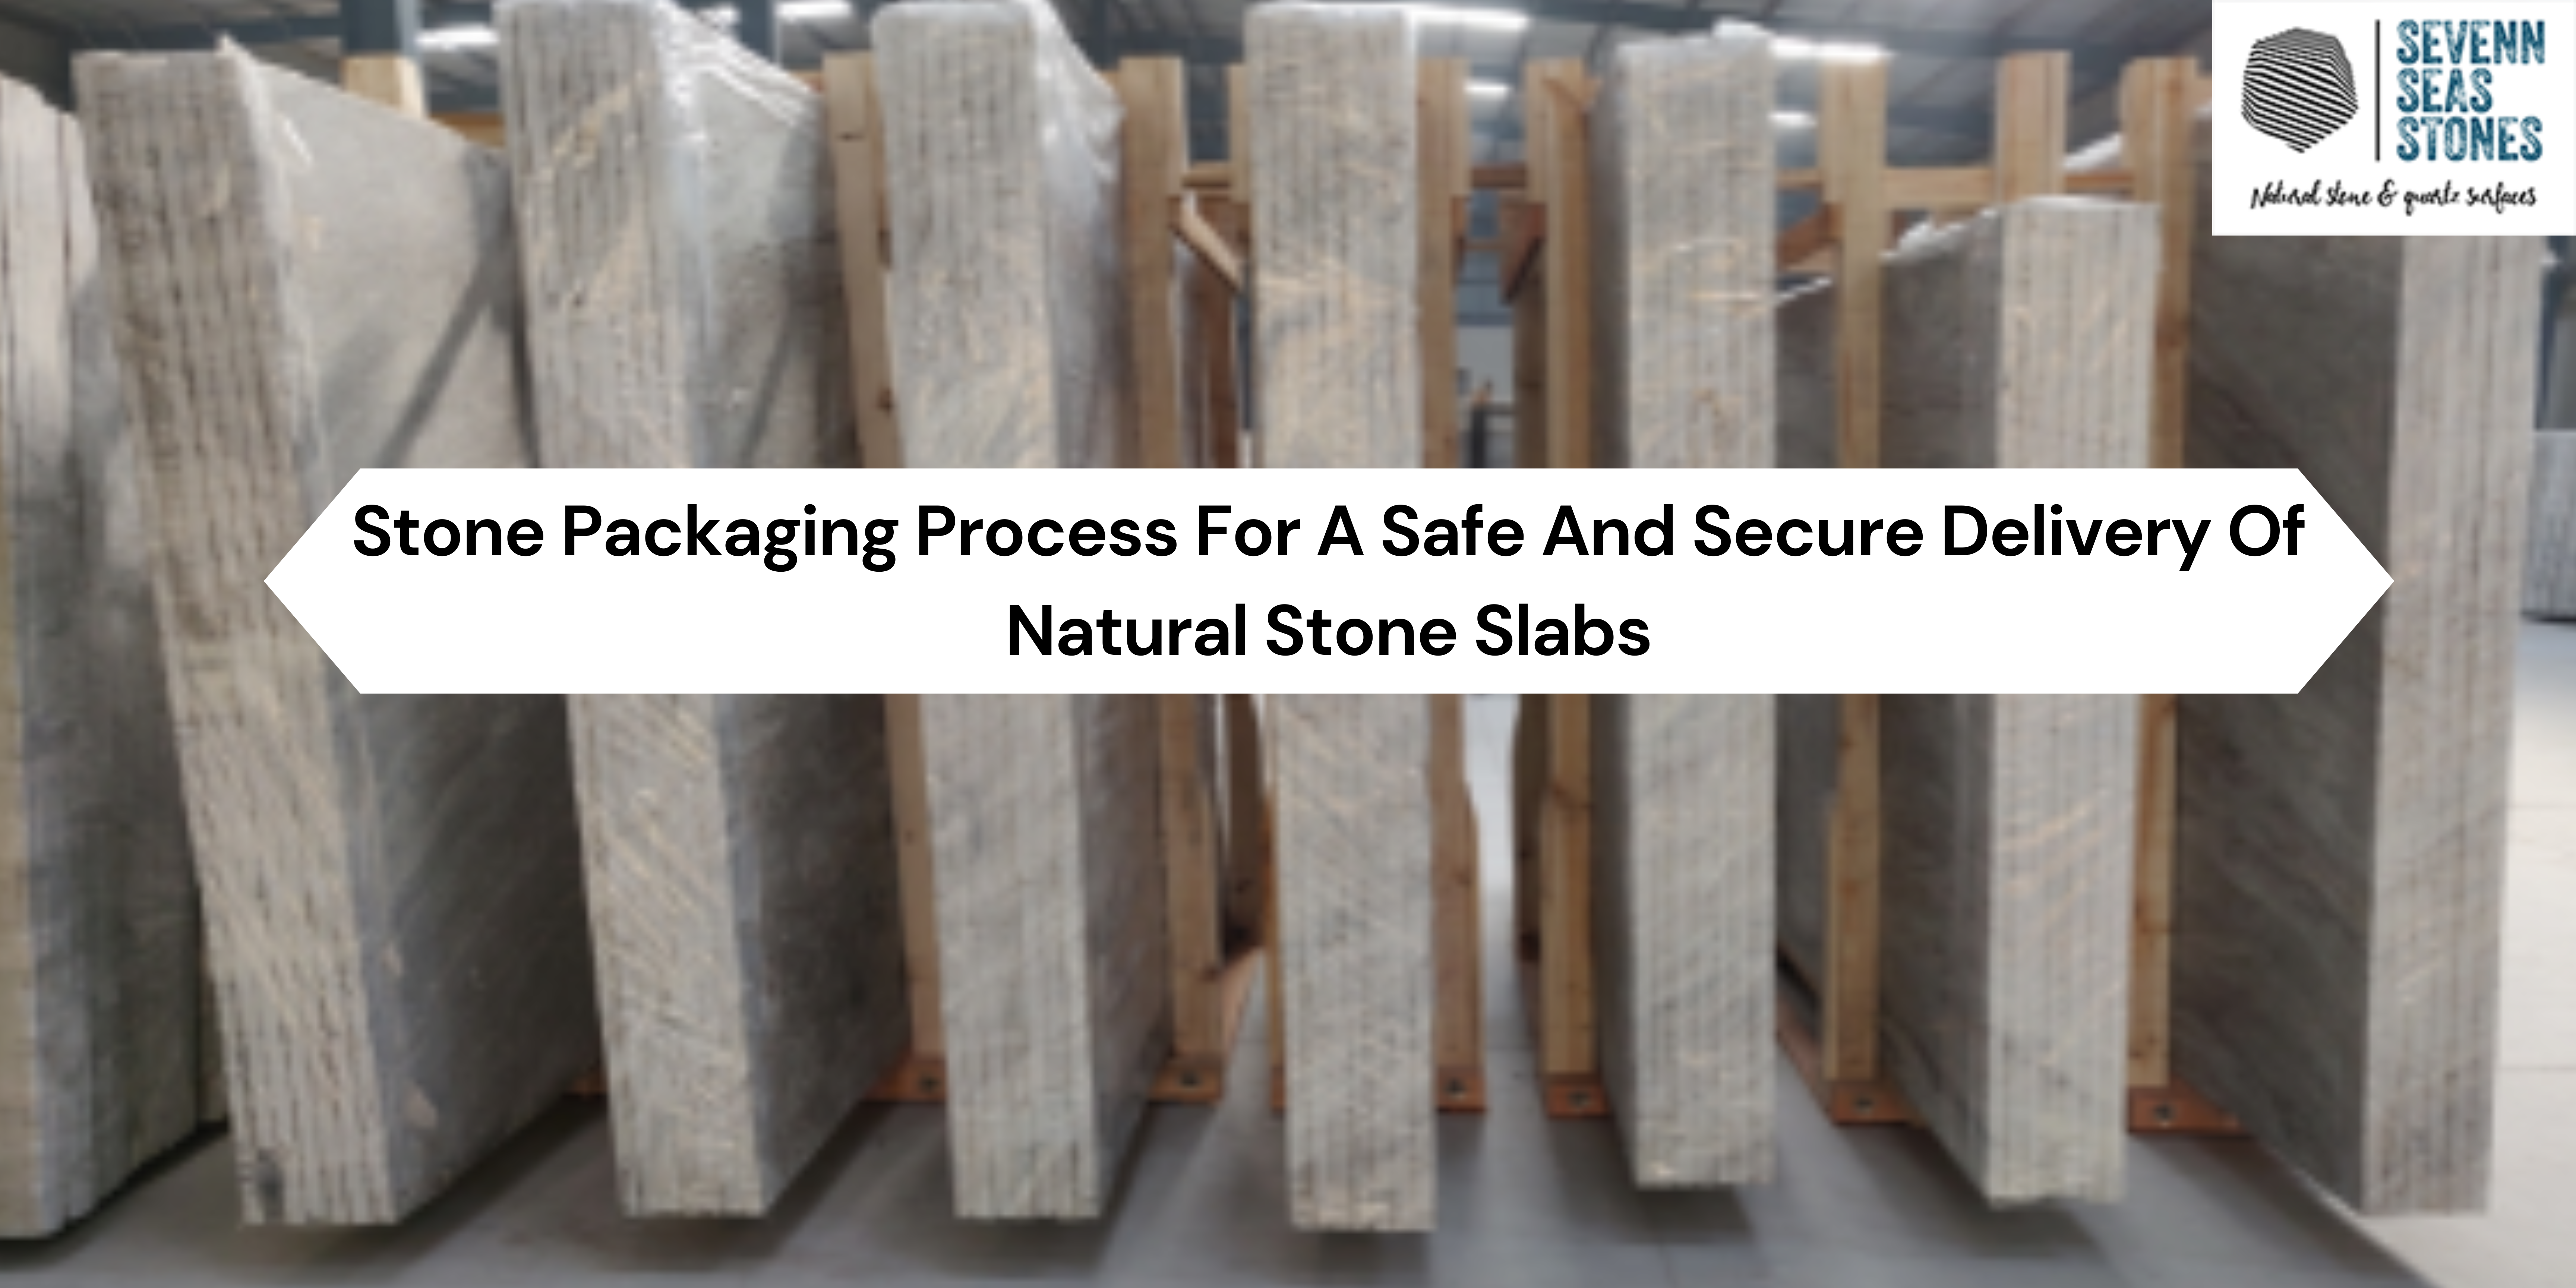 blog-Stone Packaging Process For A Safe And Secure Delivery Of Natural Stone Slabs